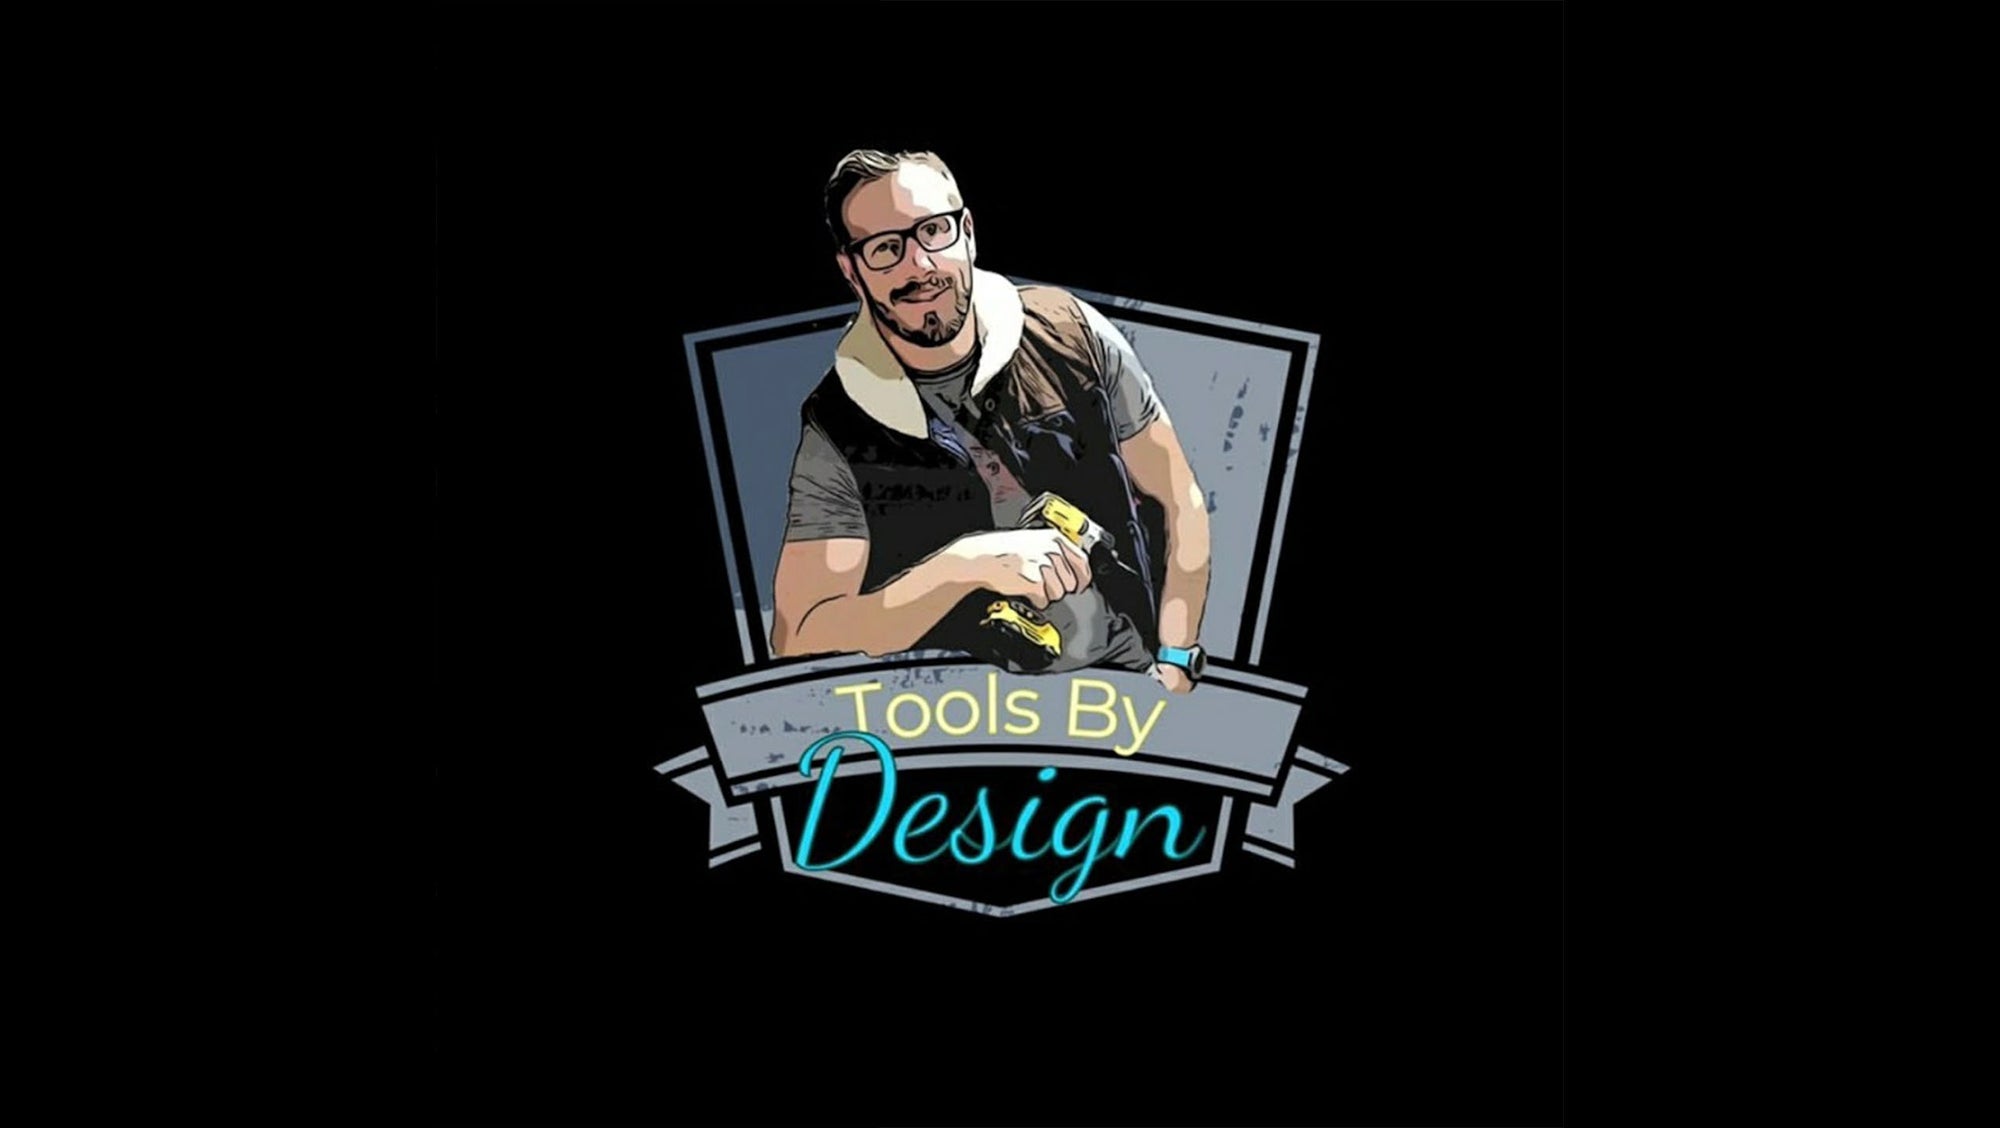 Tools by design